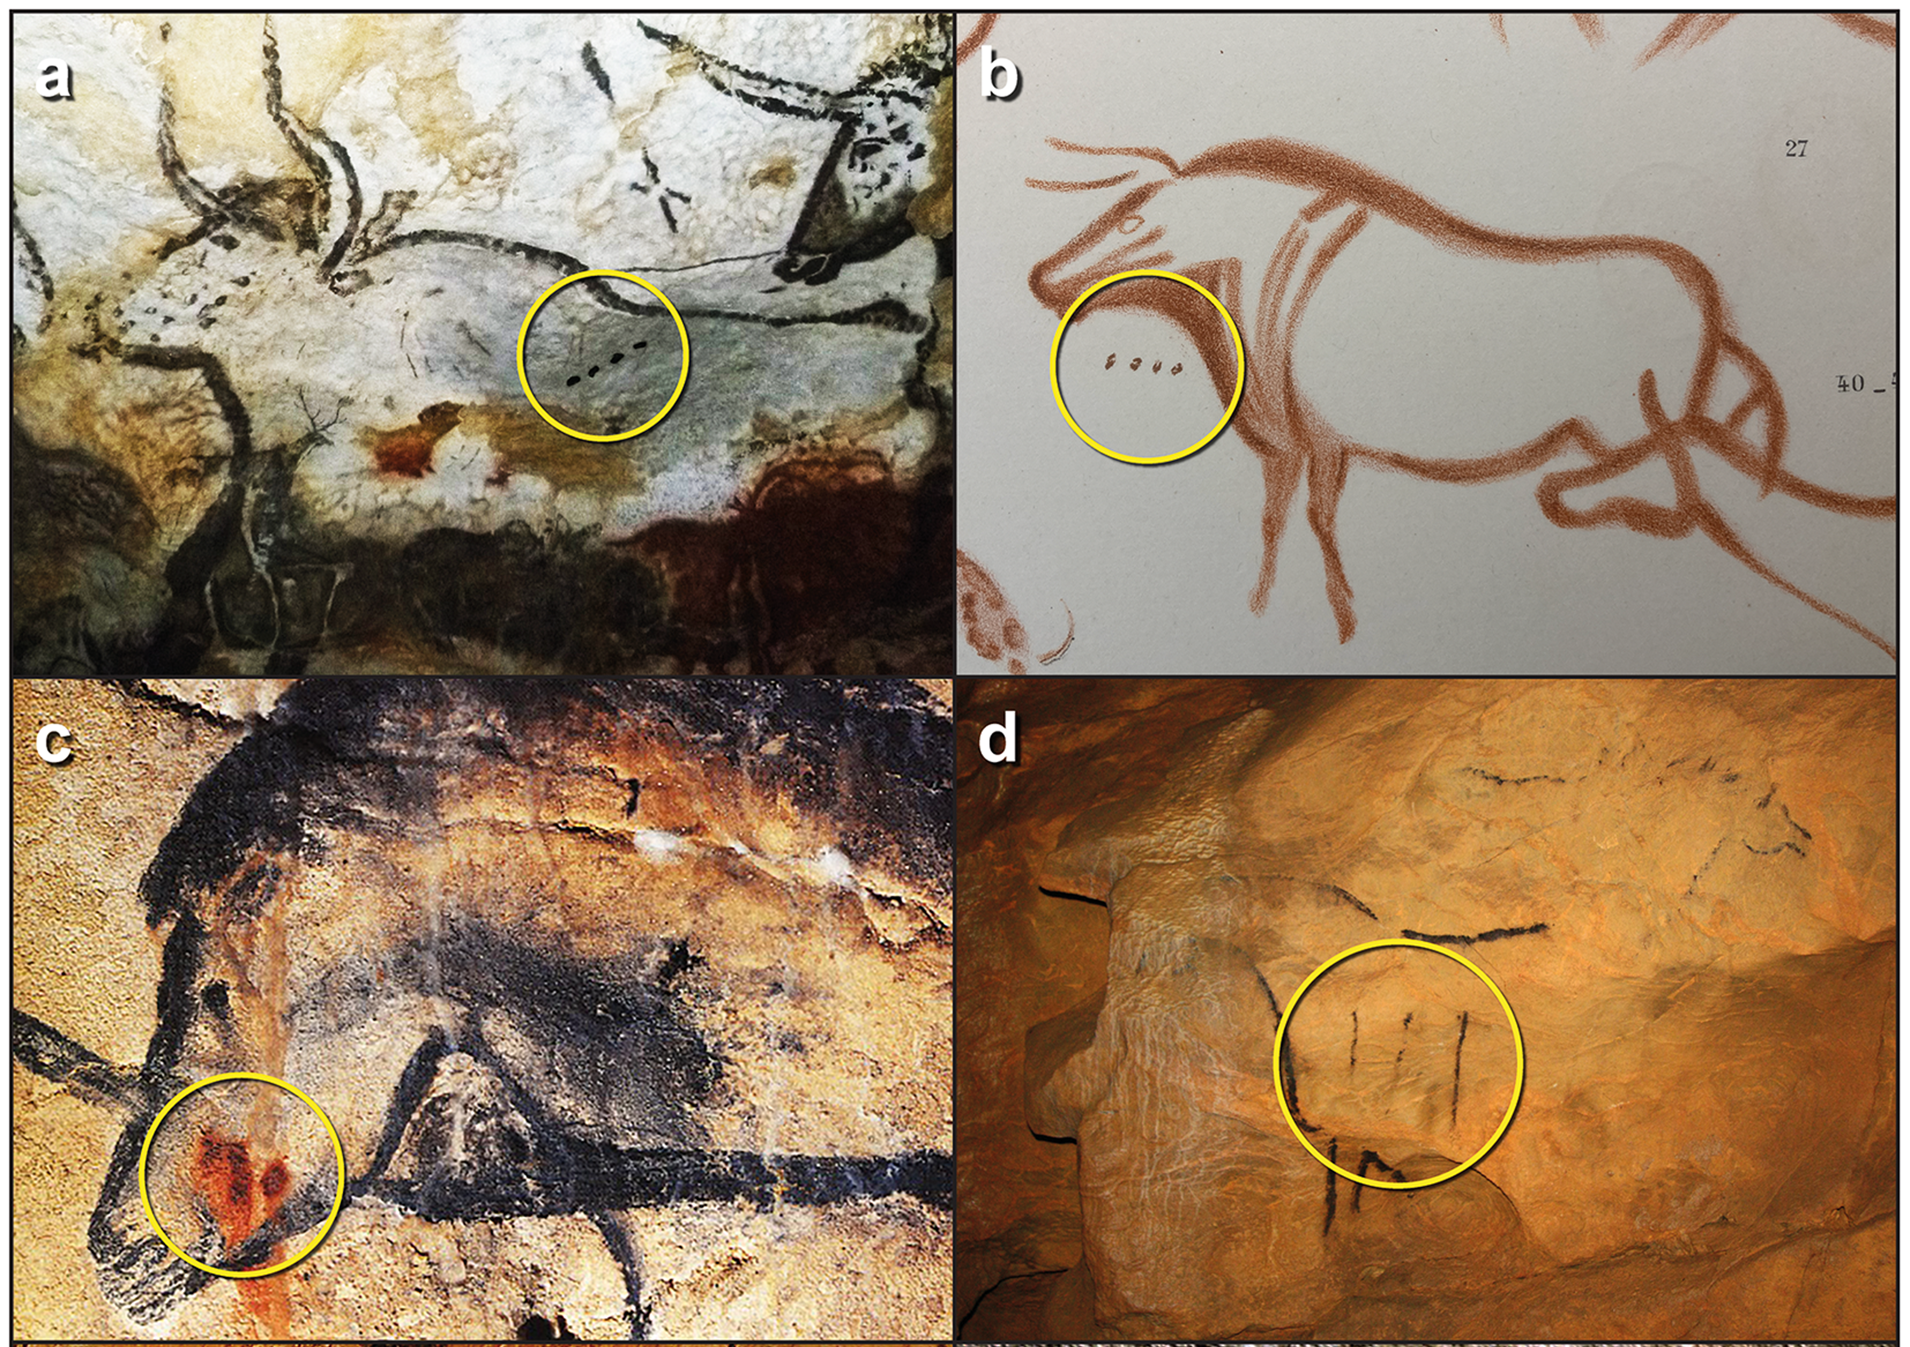 A series of early cave paintings isolating proto-writing elements